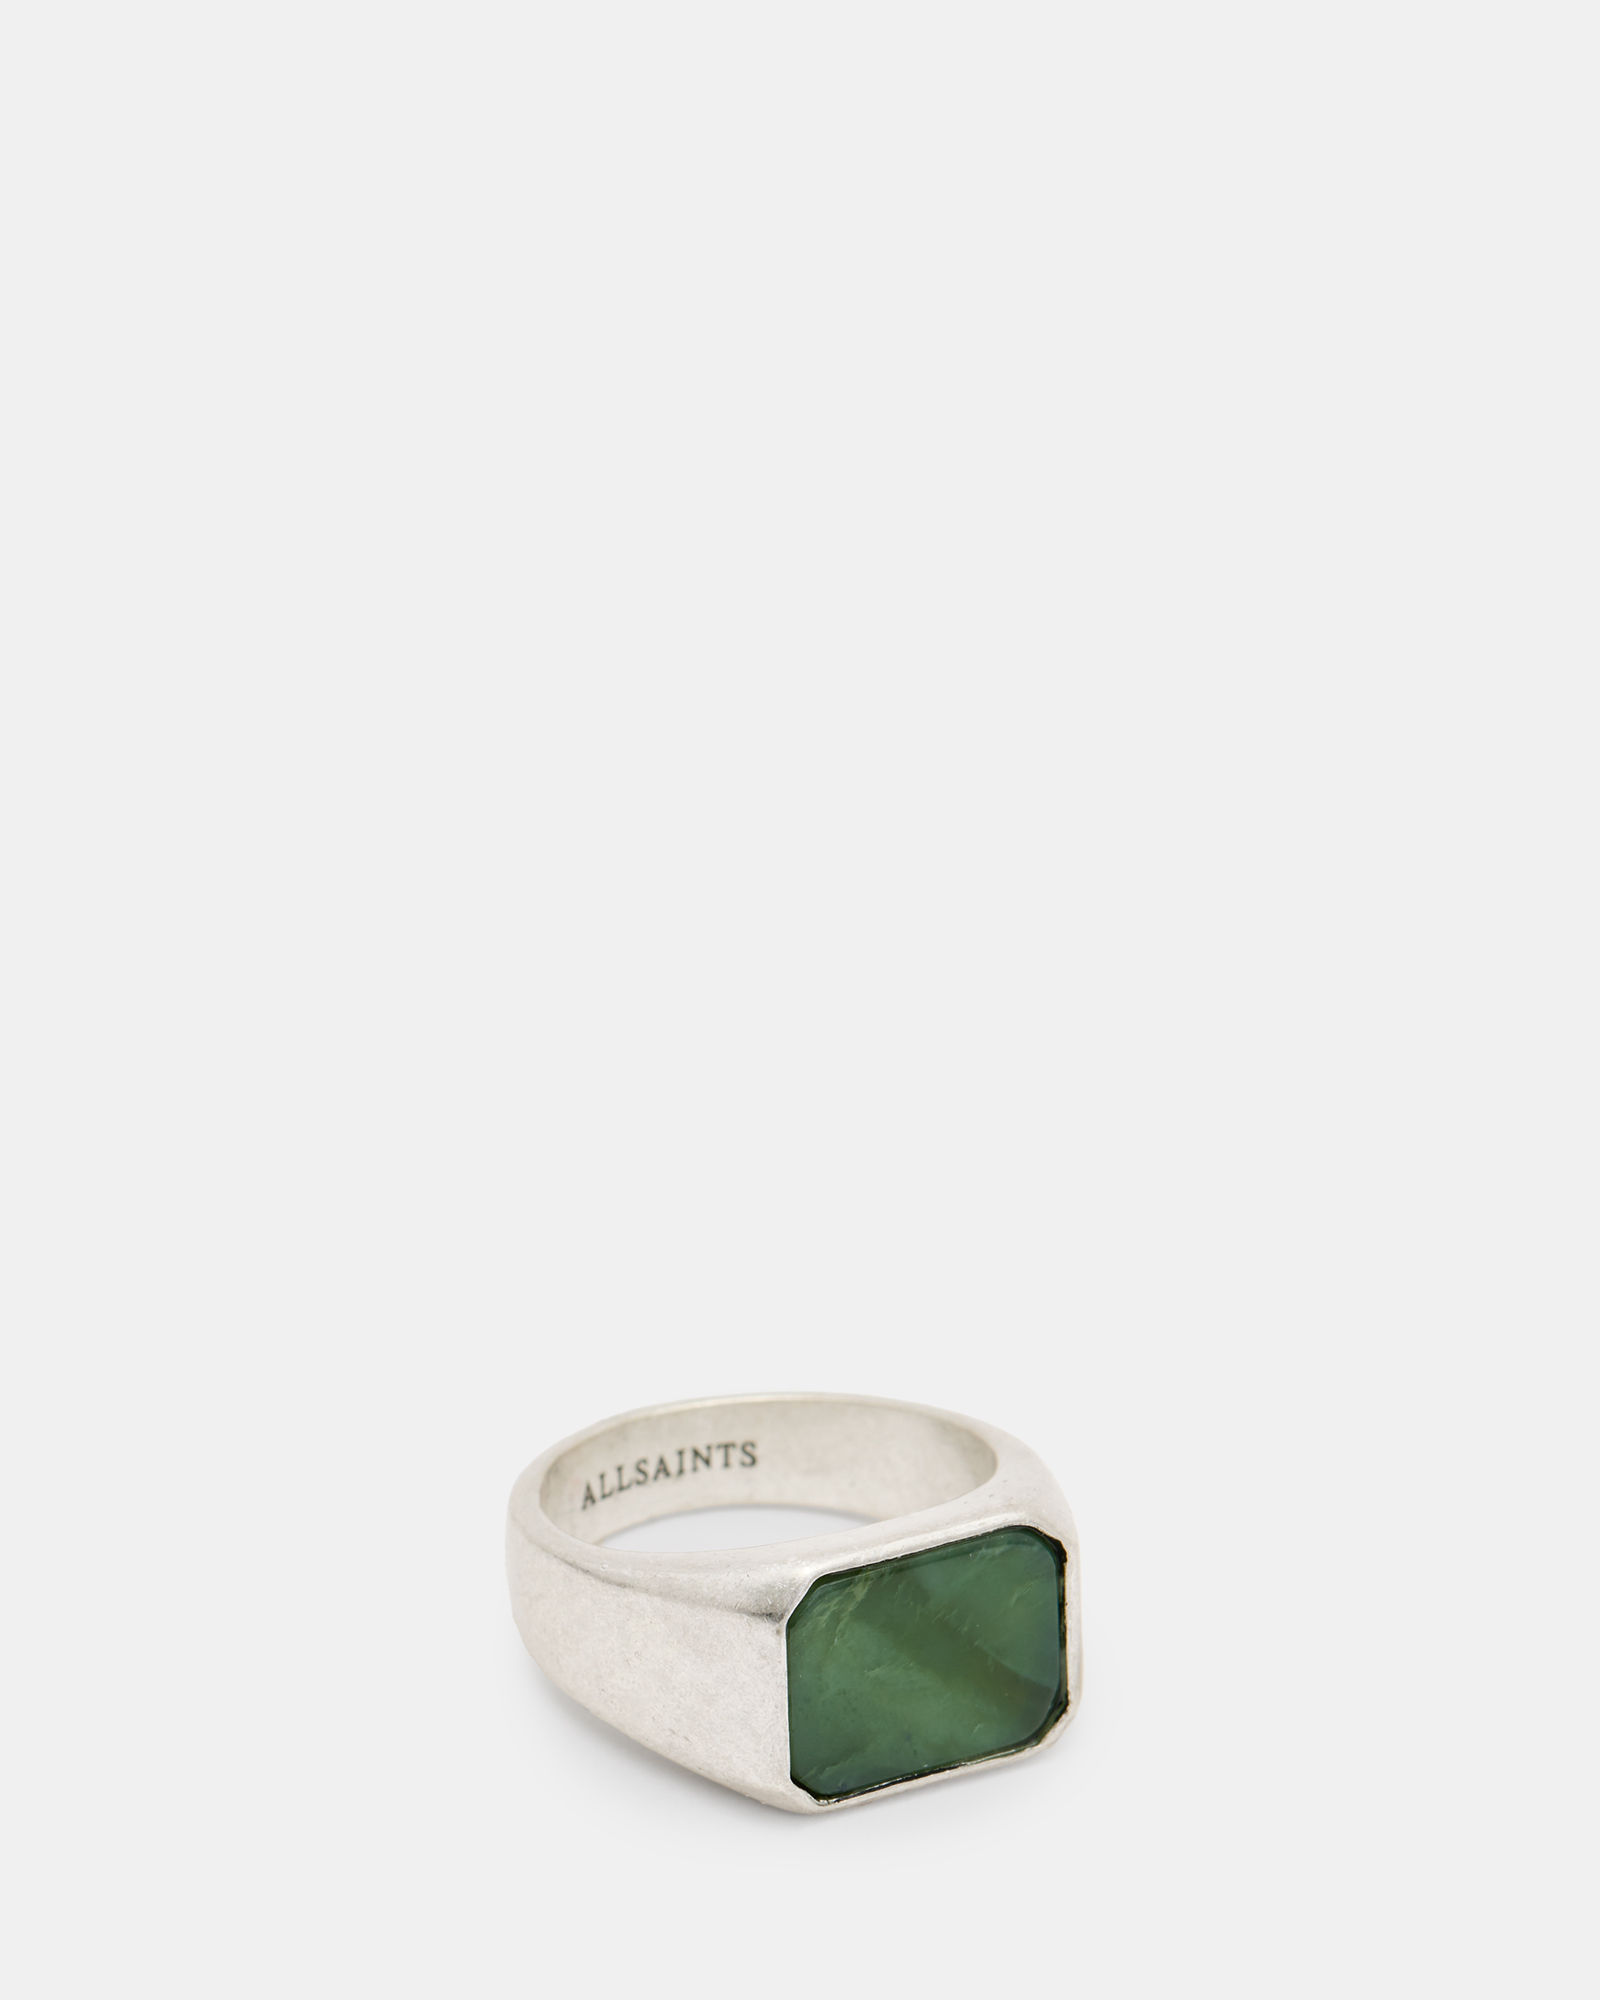 AllSaints Alldis Sterling Silver Stone Ring | £95.00 | One New Change